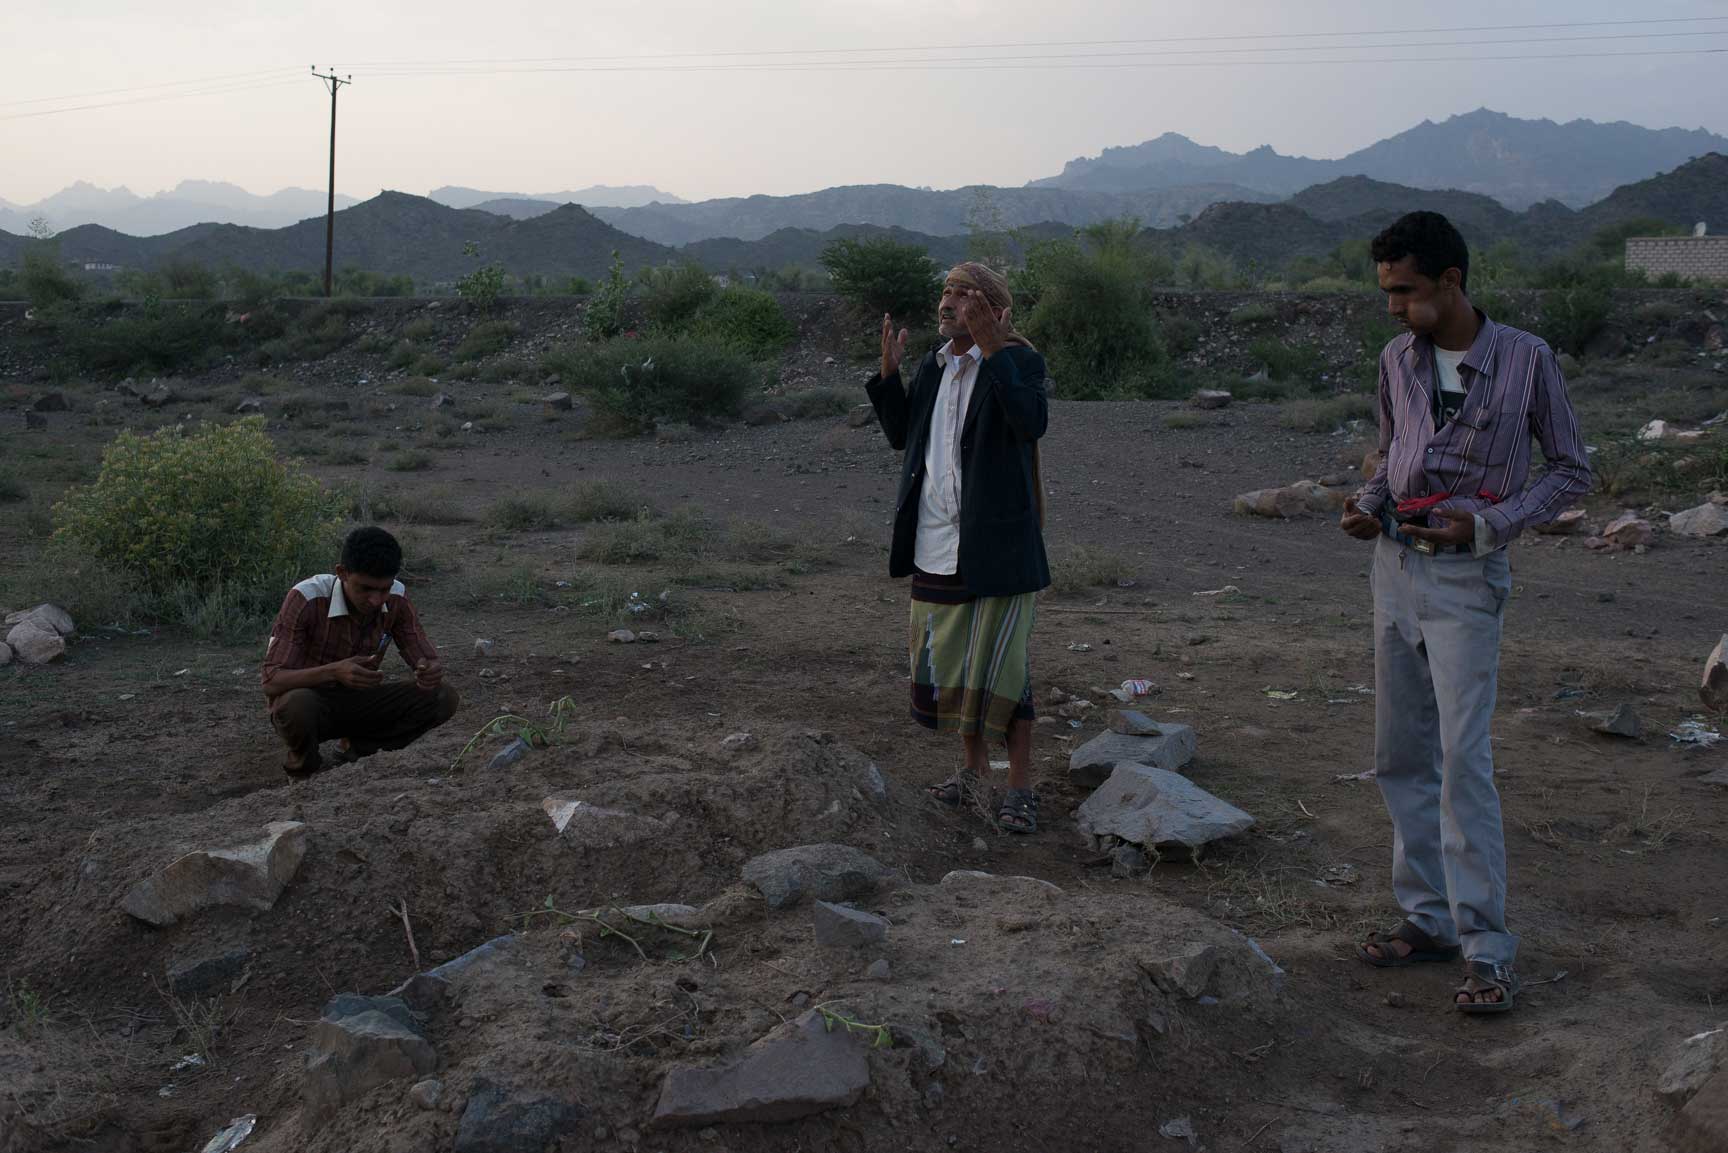 Muthana Abdullah Jaylani (center) prays over the graves of his relatives and neighbors who were killed by an airstrike, July 22, 2015. The strike killed at least five people, though only two were reported to the local MSF Hospital.